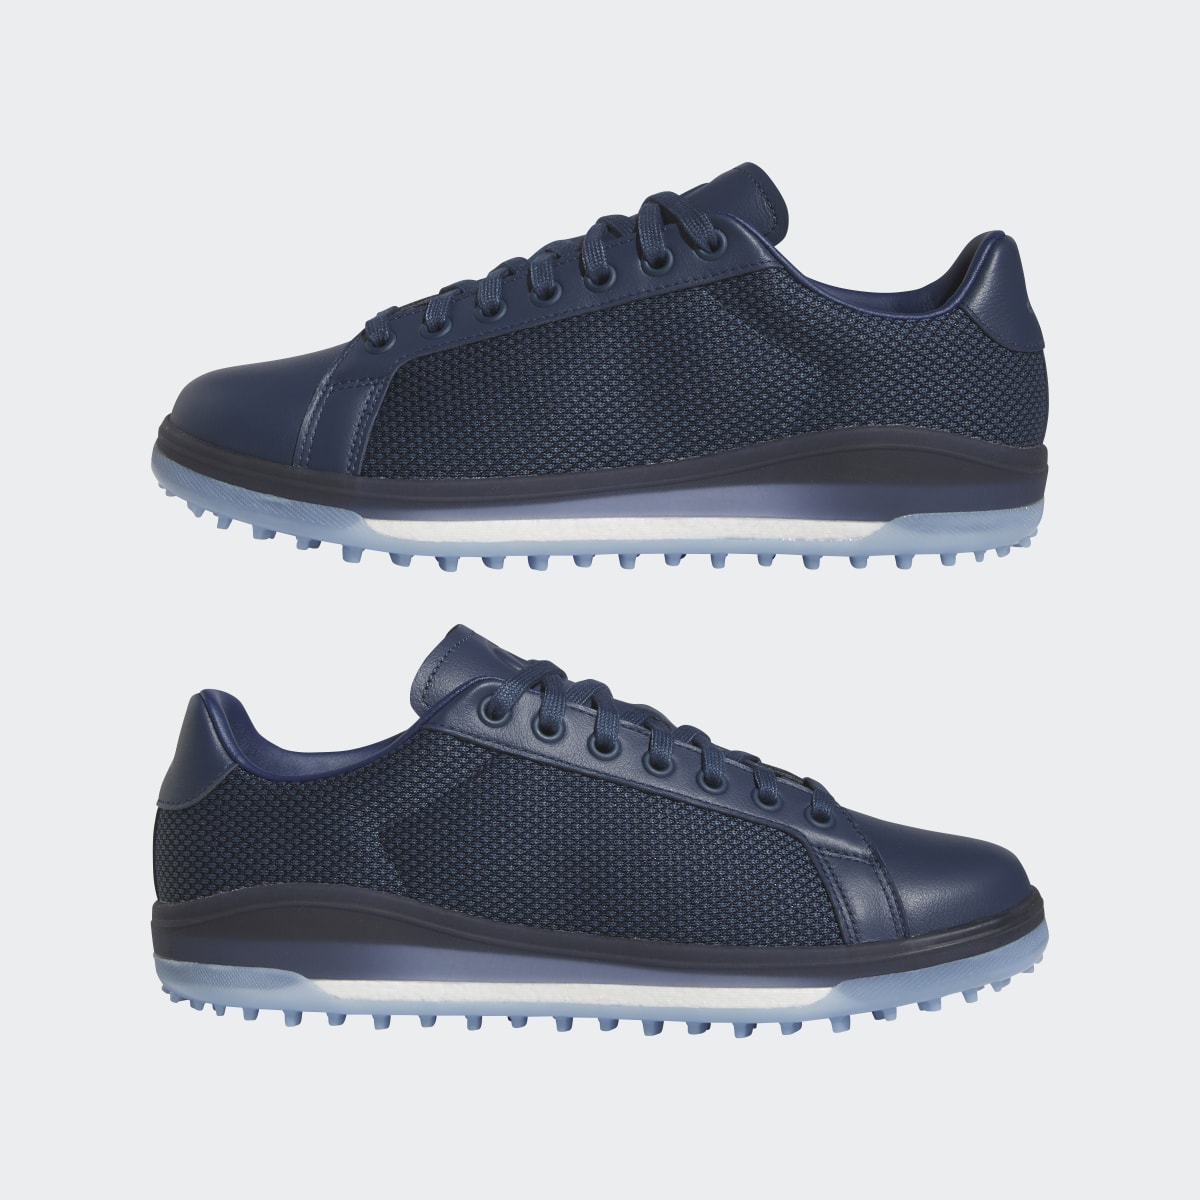 Adidas Go-To Spikeless 1 Golf Shoes. 8